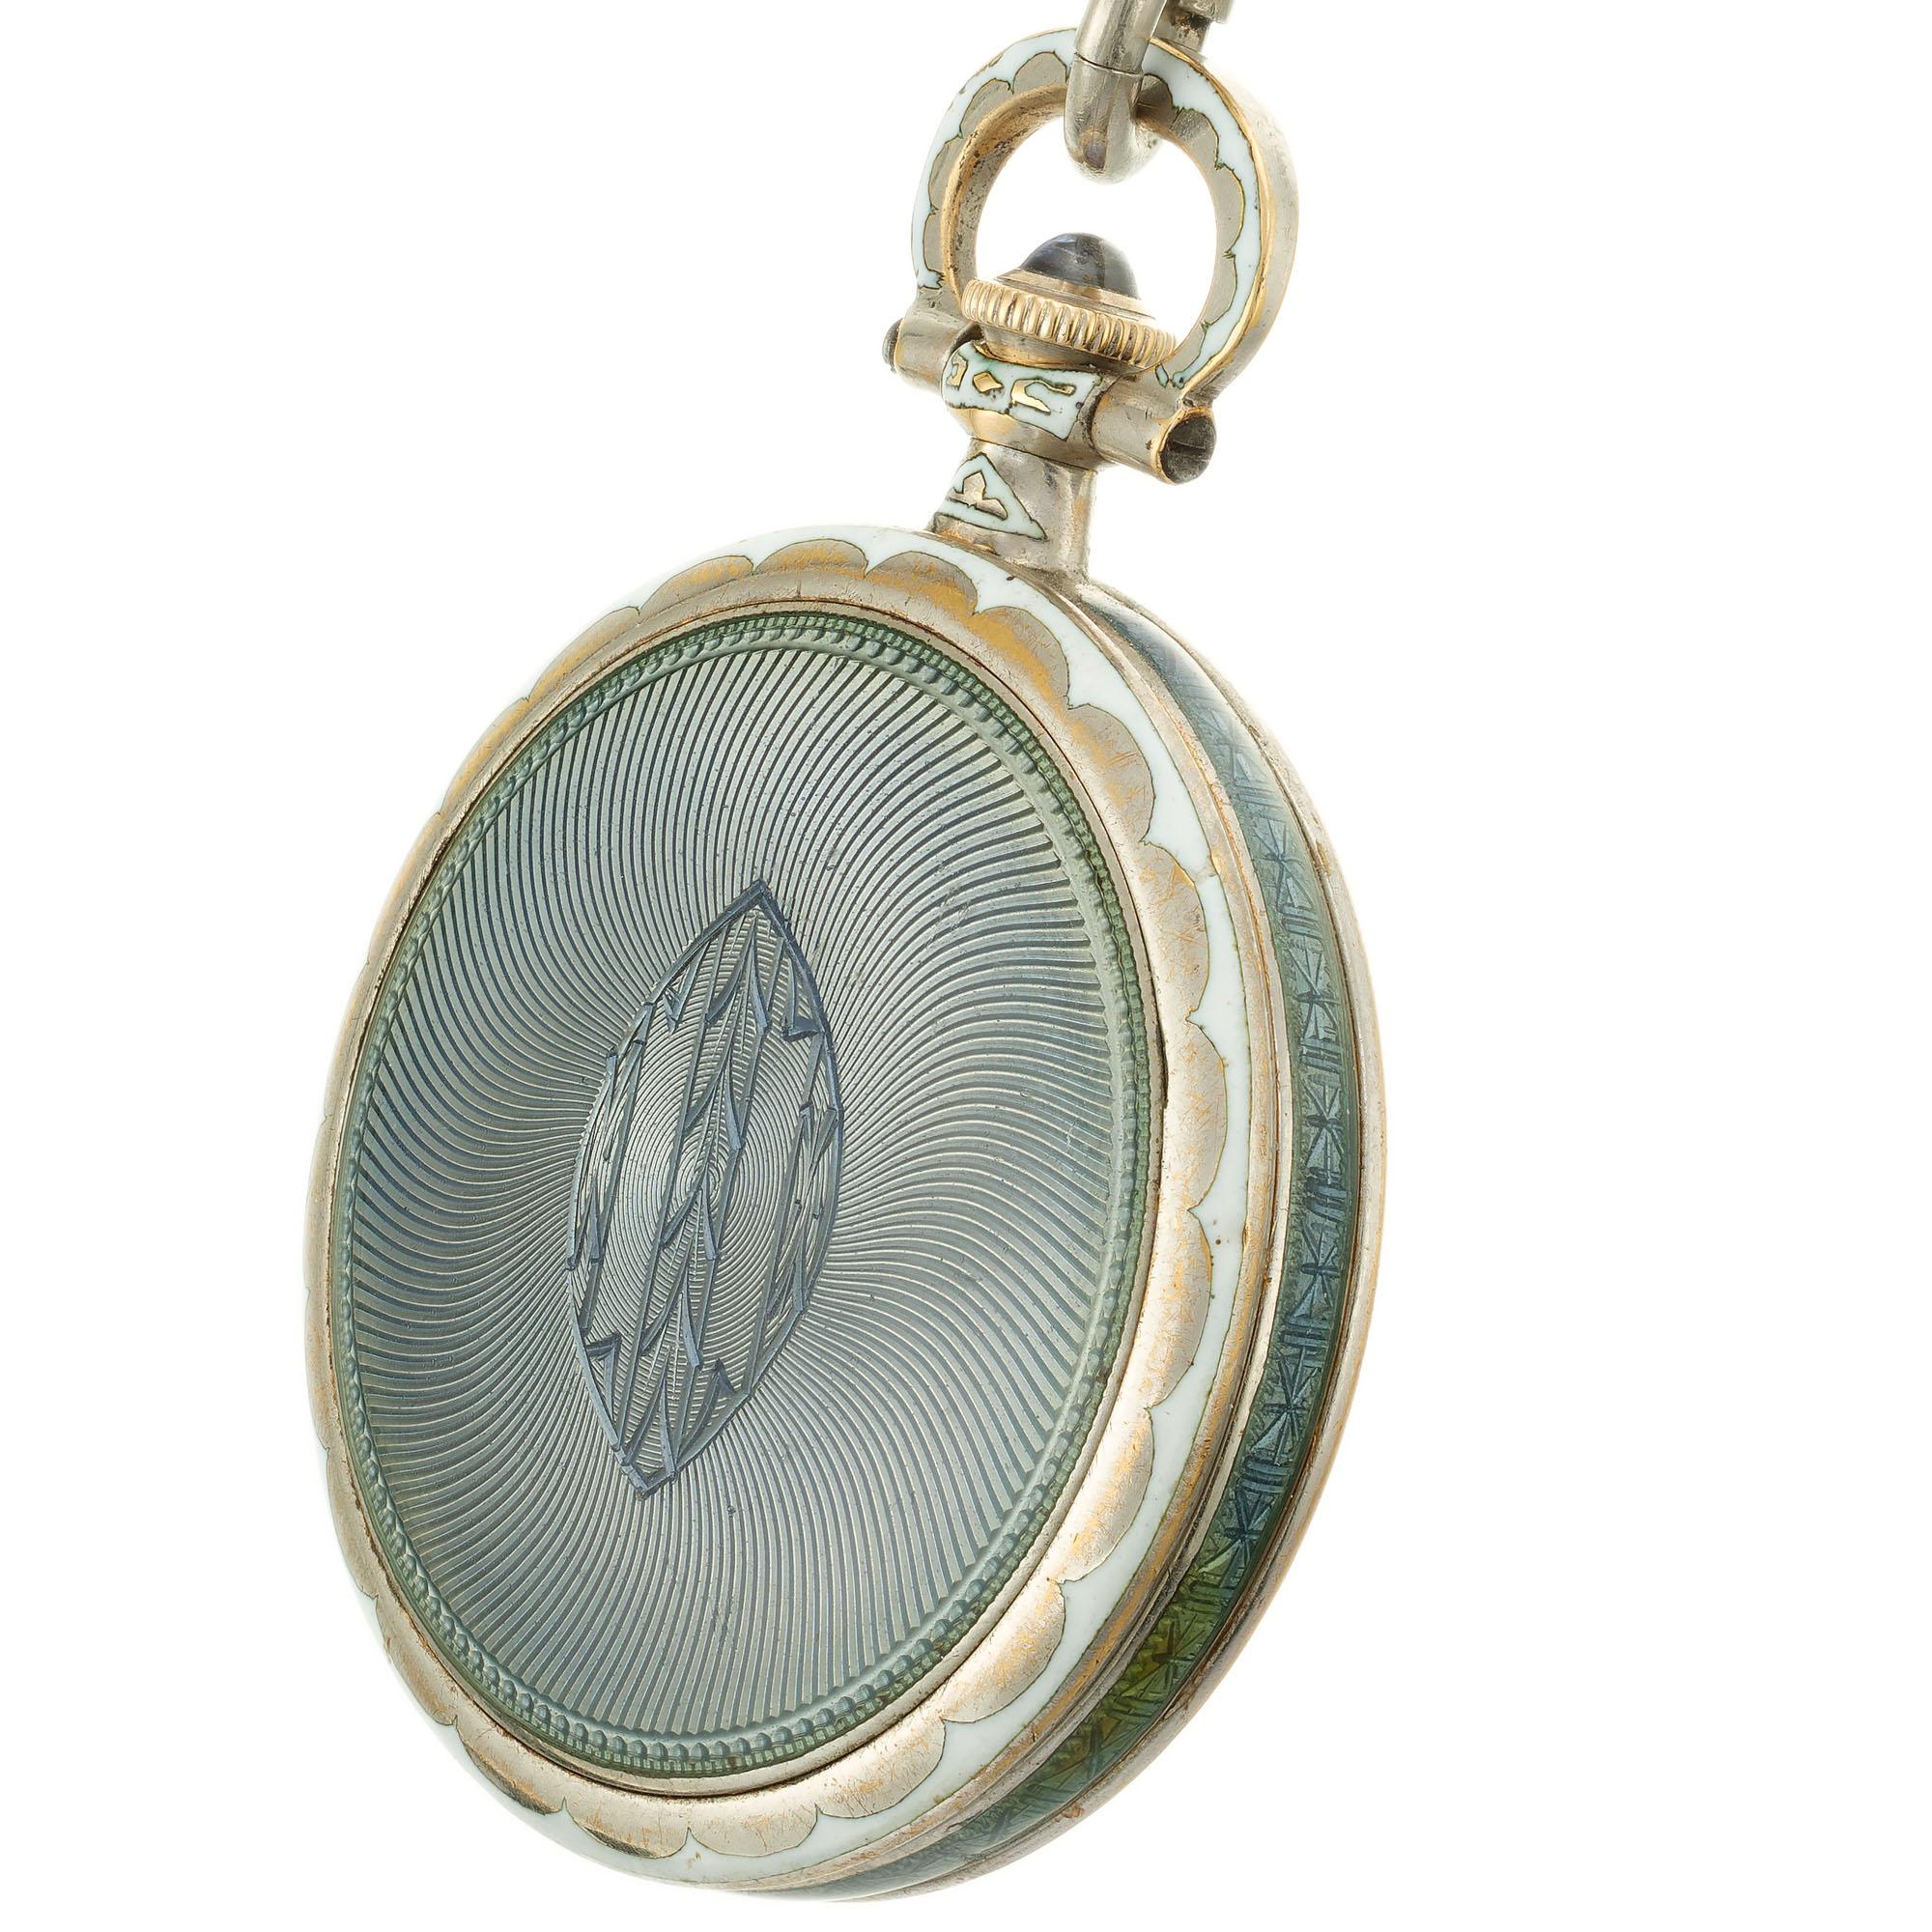 Longines Grey Blue White Gold Art Deco Enamel Watch Pendant In Good Condition For Sale In Stamford, CT